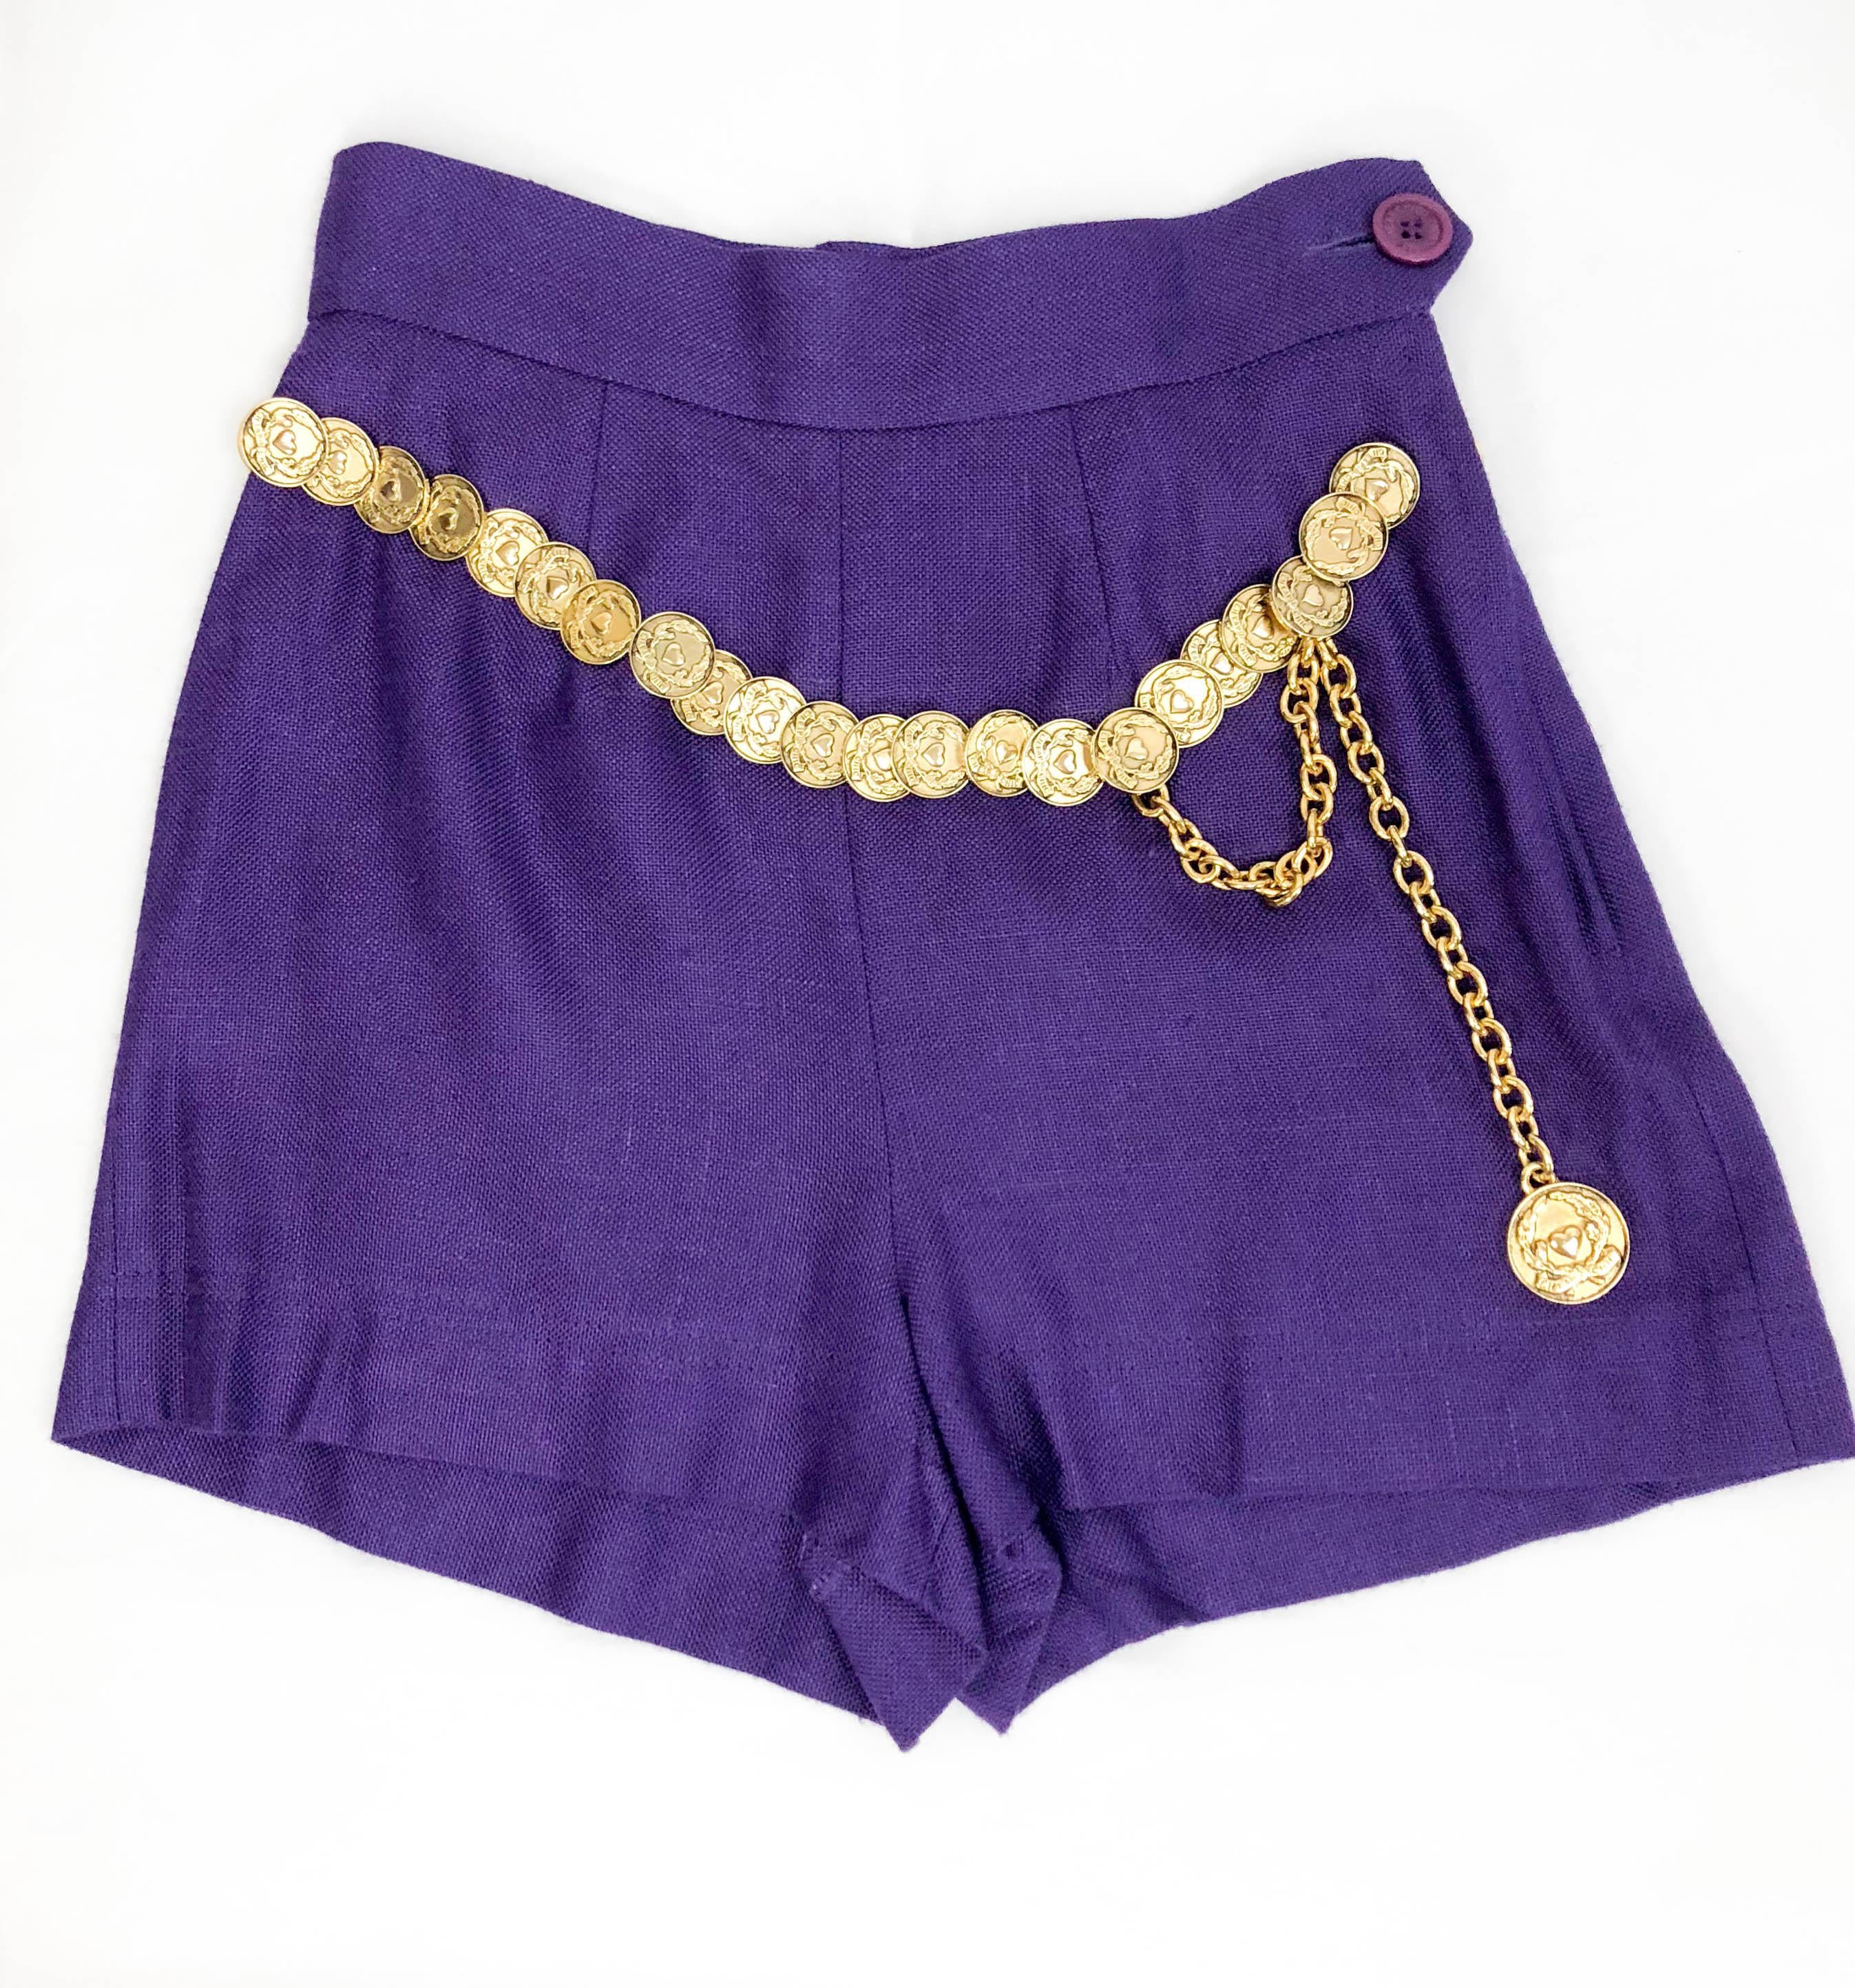 Vintage Moschino Purple Linen Shorts. These really cool shorts by Moschino Cheap and Chic date back from the 1990’s. Made in royal purple linen, they feature an attached belt made of gilt metal coins. Perfect for the sexy and confident girl.

Label